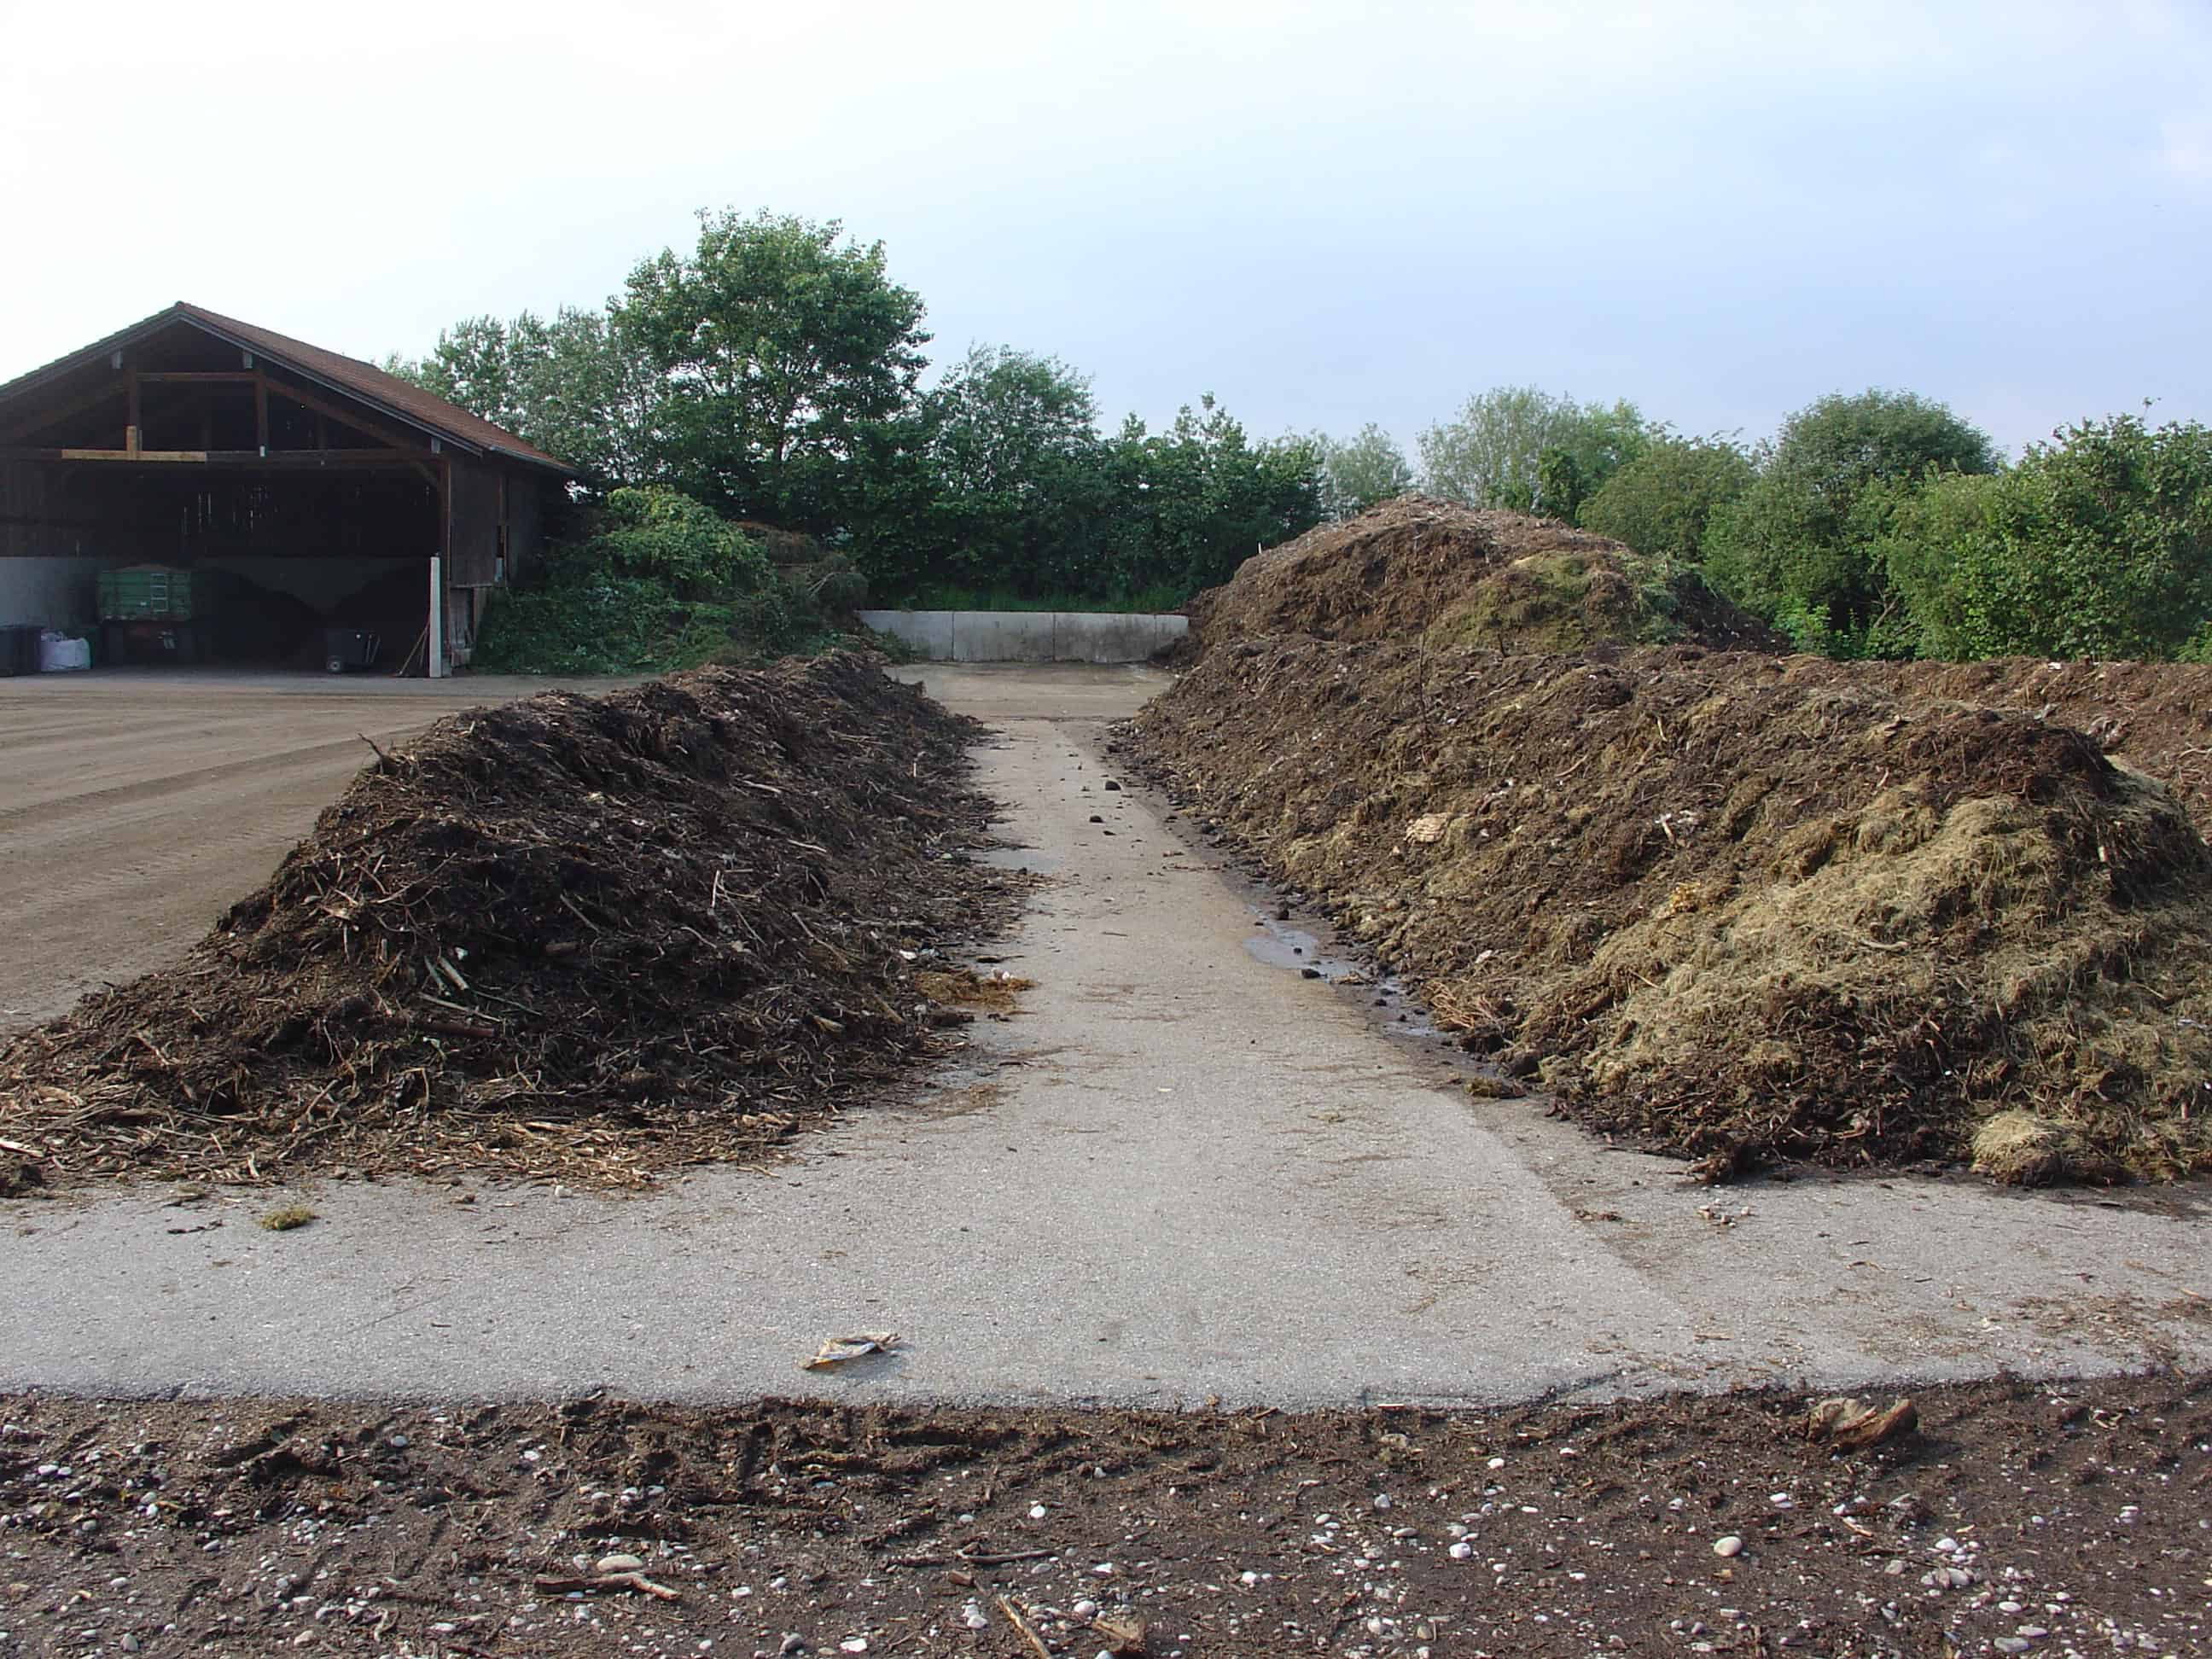 A community composting site in Germany.